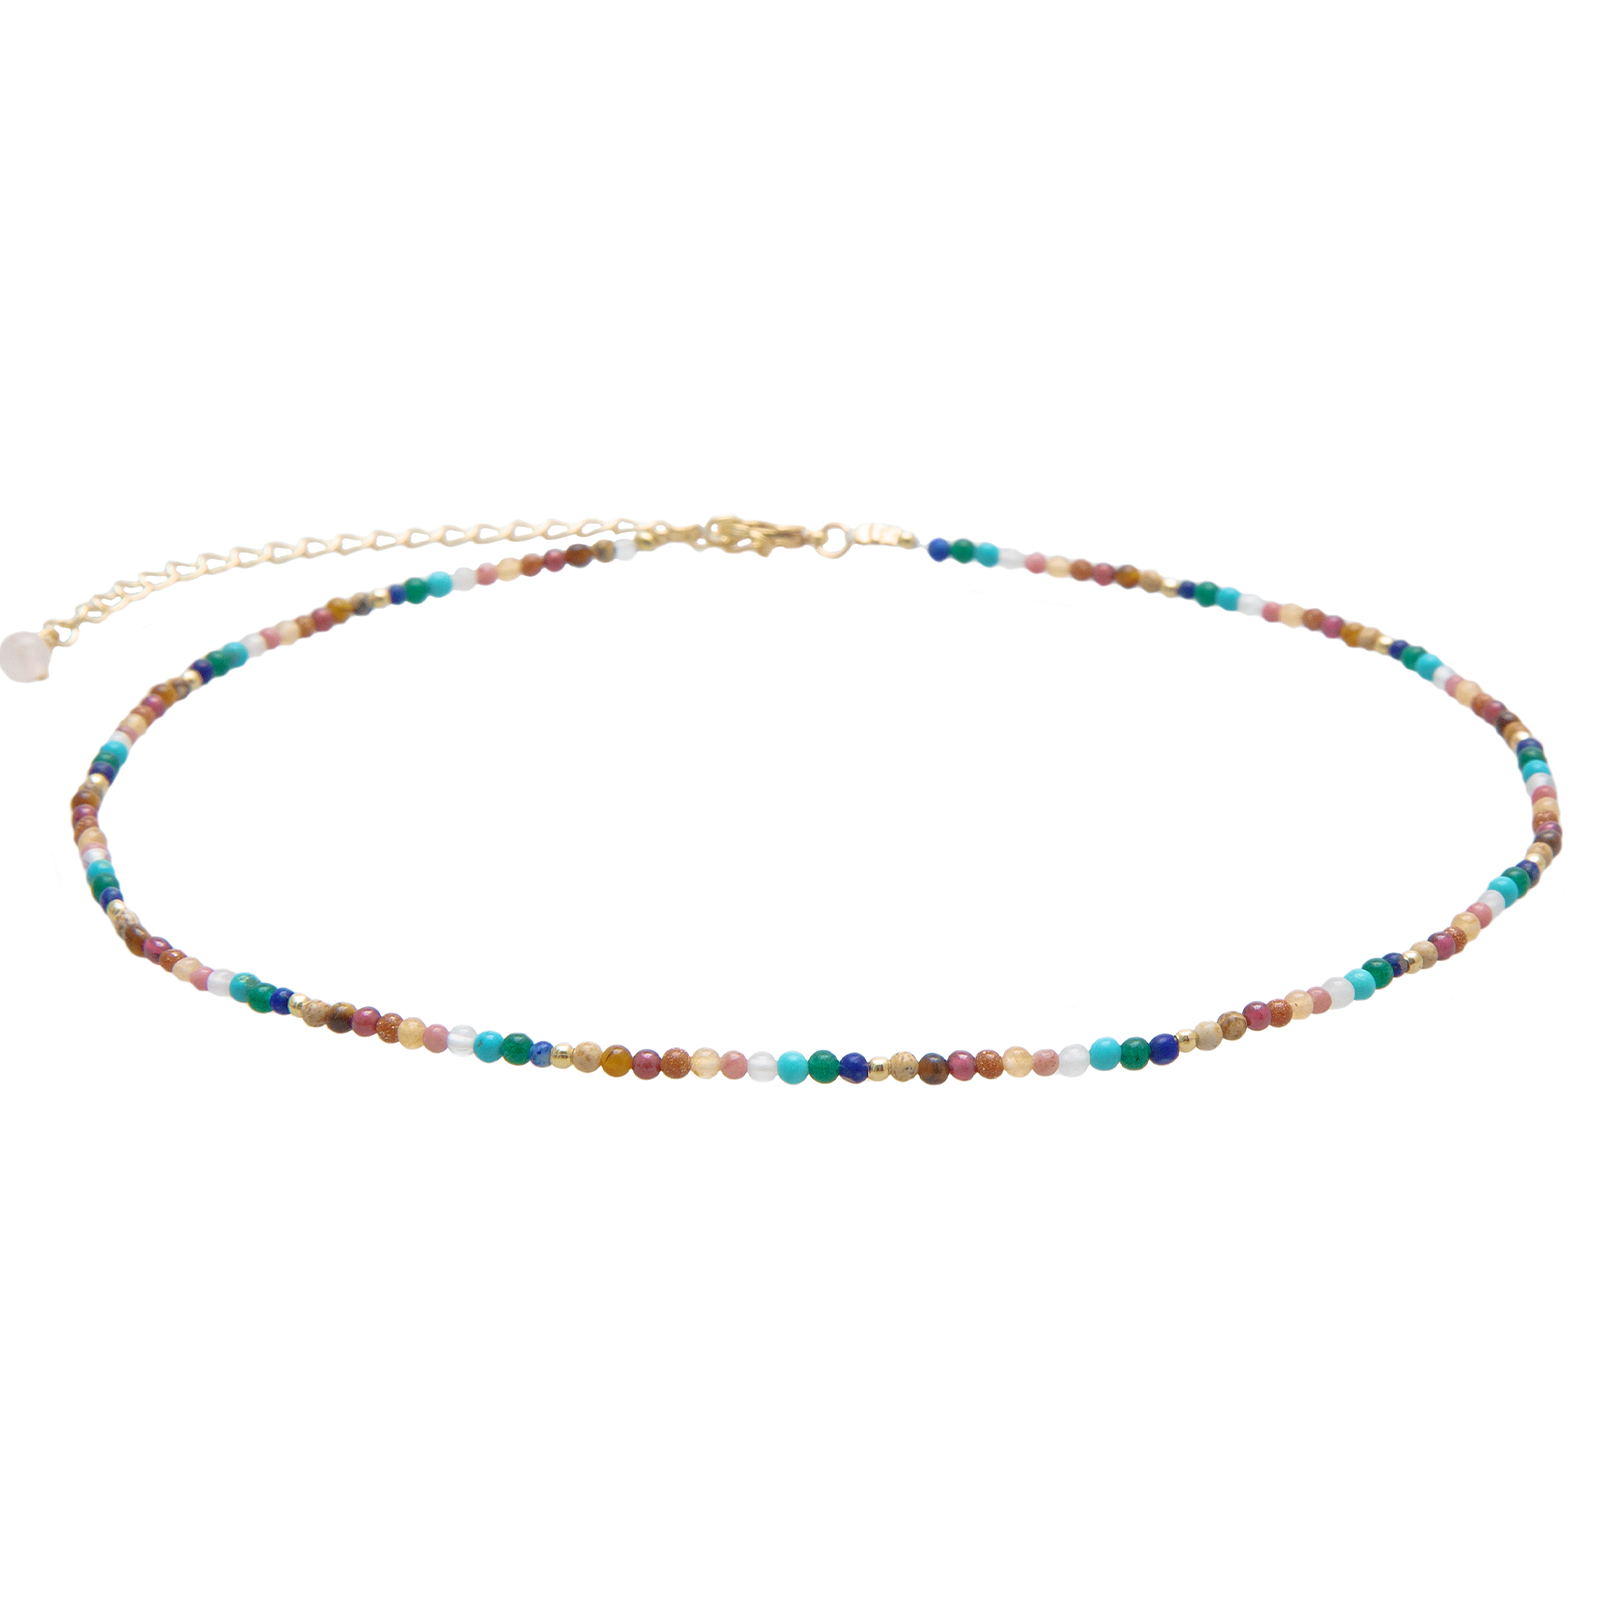 2mm multicolor stone healing necklace with a gold chain